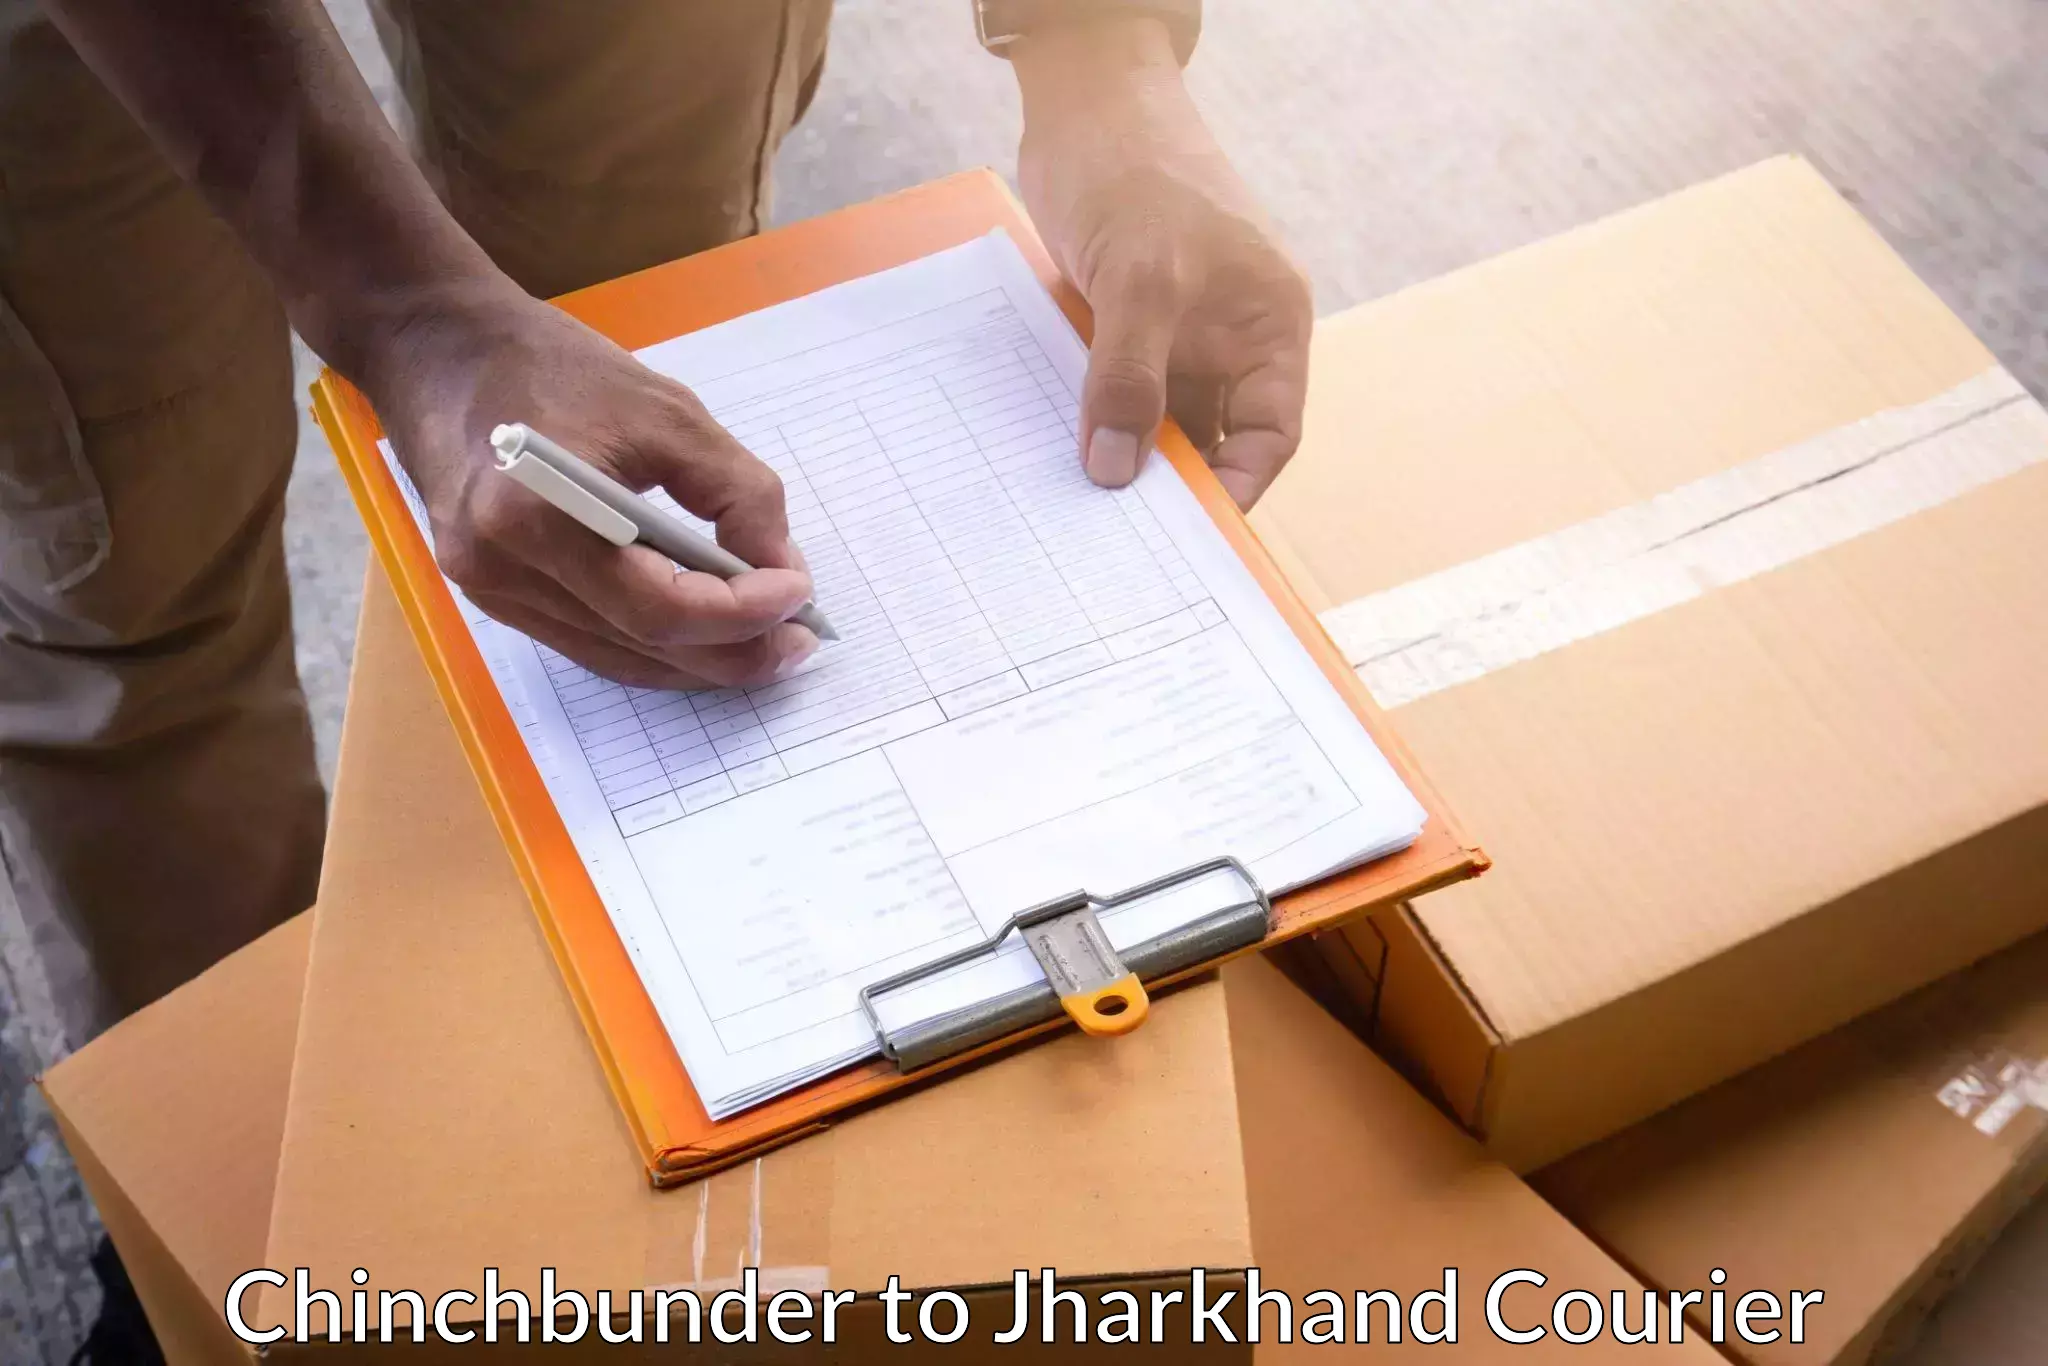 Reliable delivery network Chinchbunder to Jharkhand